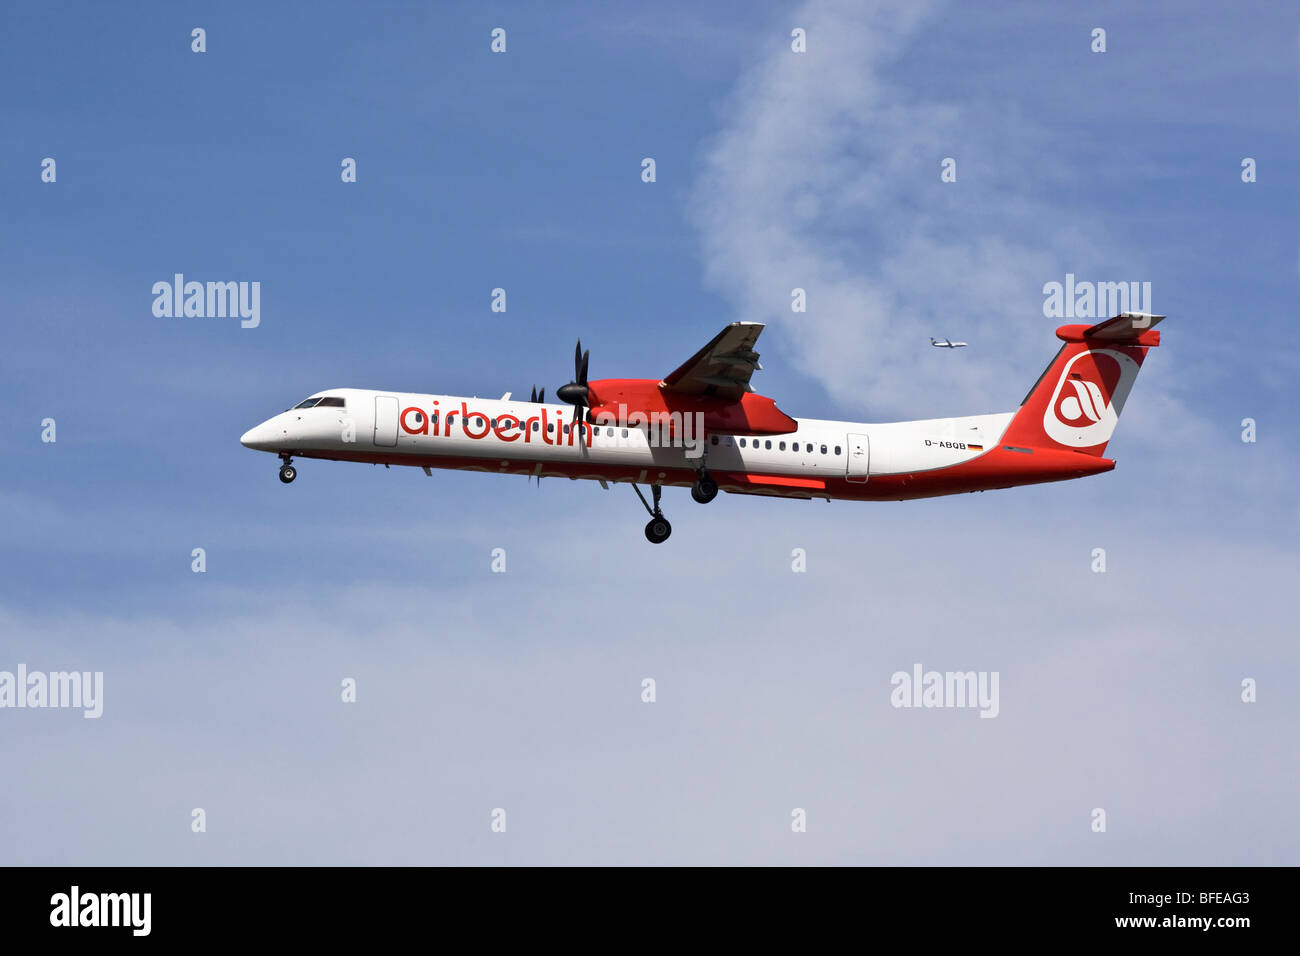 A De Havilland Canada Dash 8 turbo prop airliner of the German airline Air Berlin on final approach Stock Photo